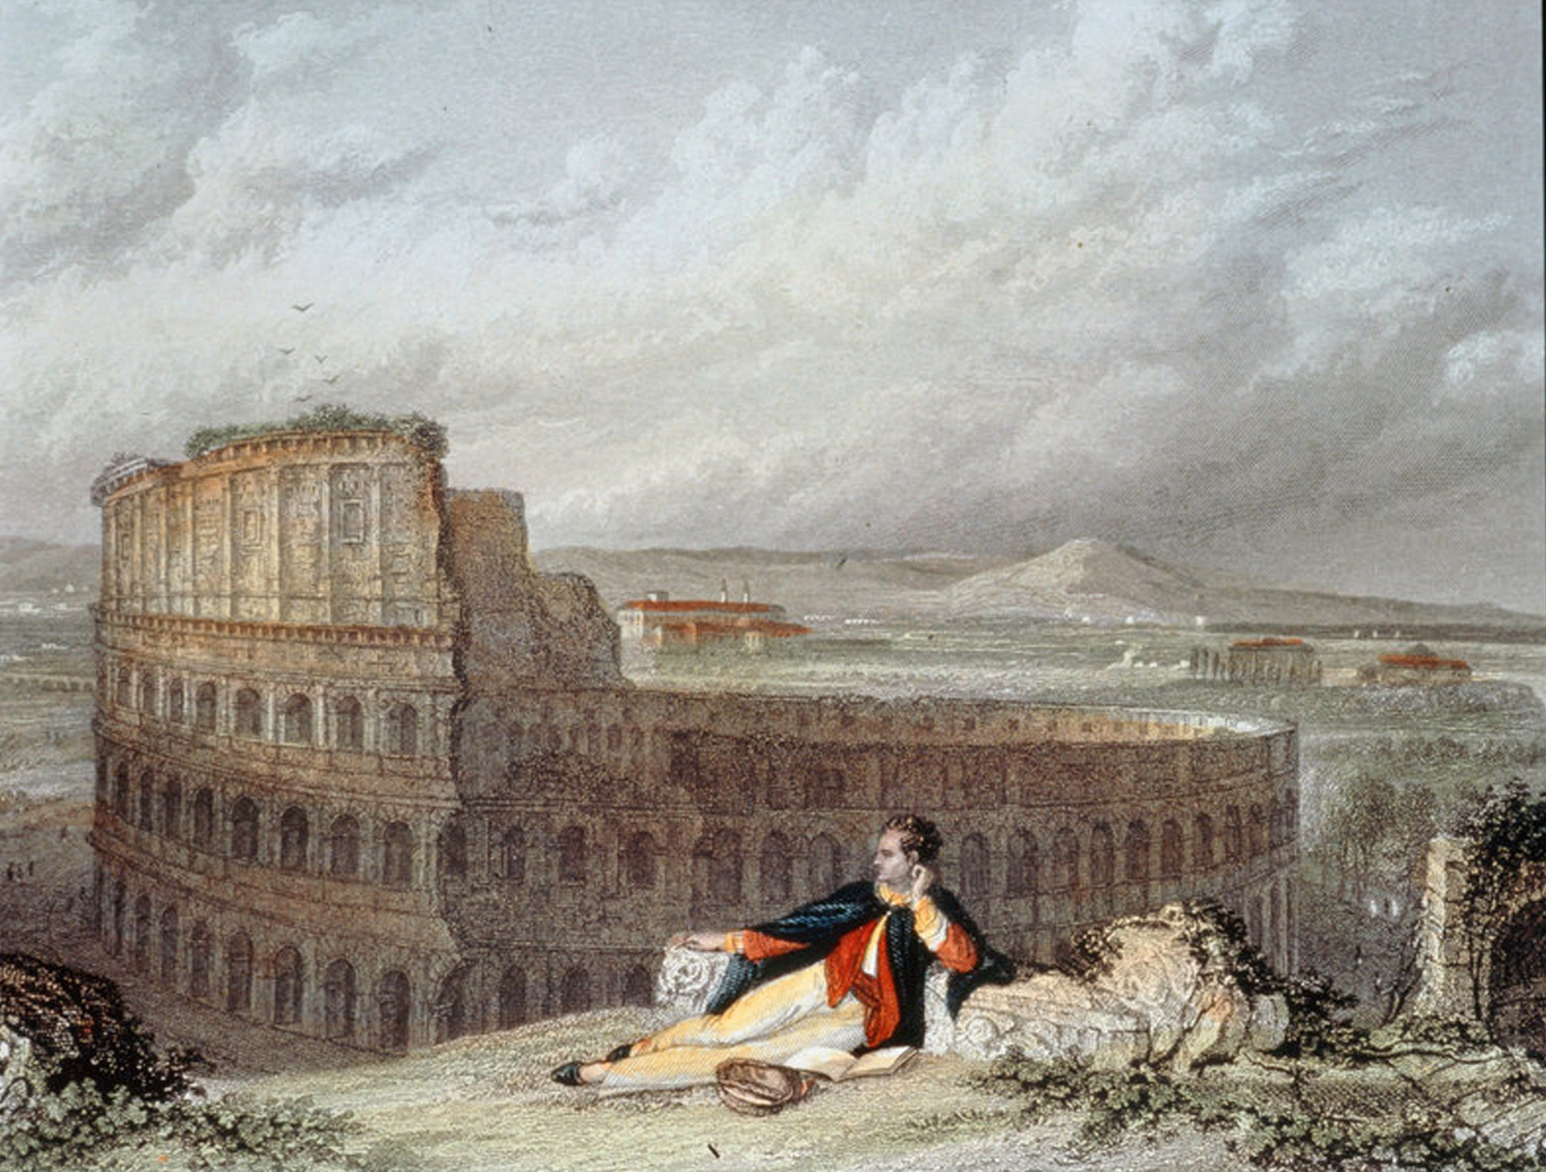 Lord Byron contemplating the Colosseum in Rome. By engraver James Tibbitts Willmore or Arthur Willmore, after the original composition by William Westall.